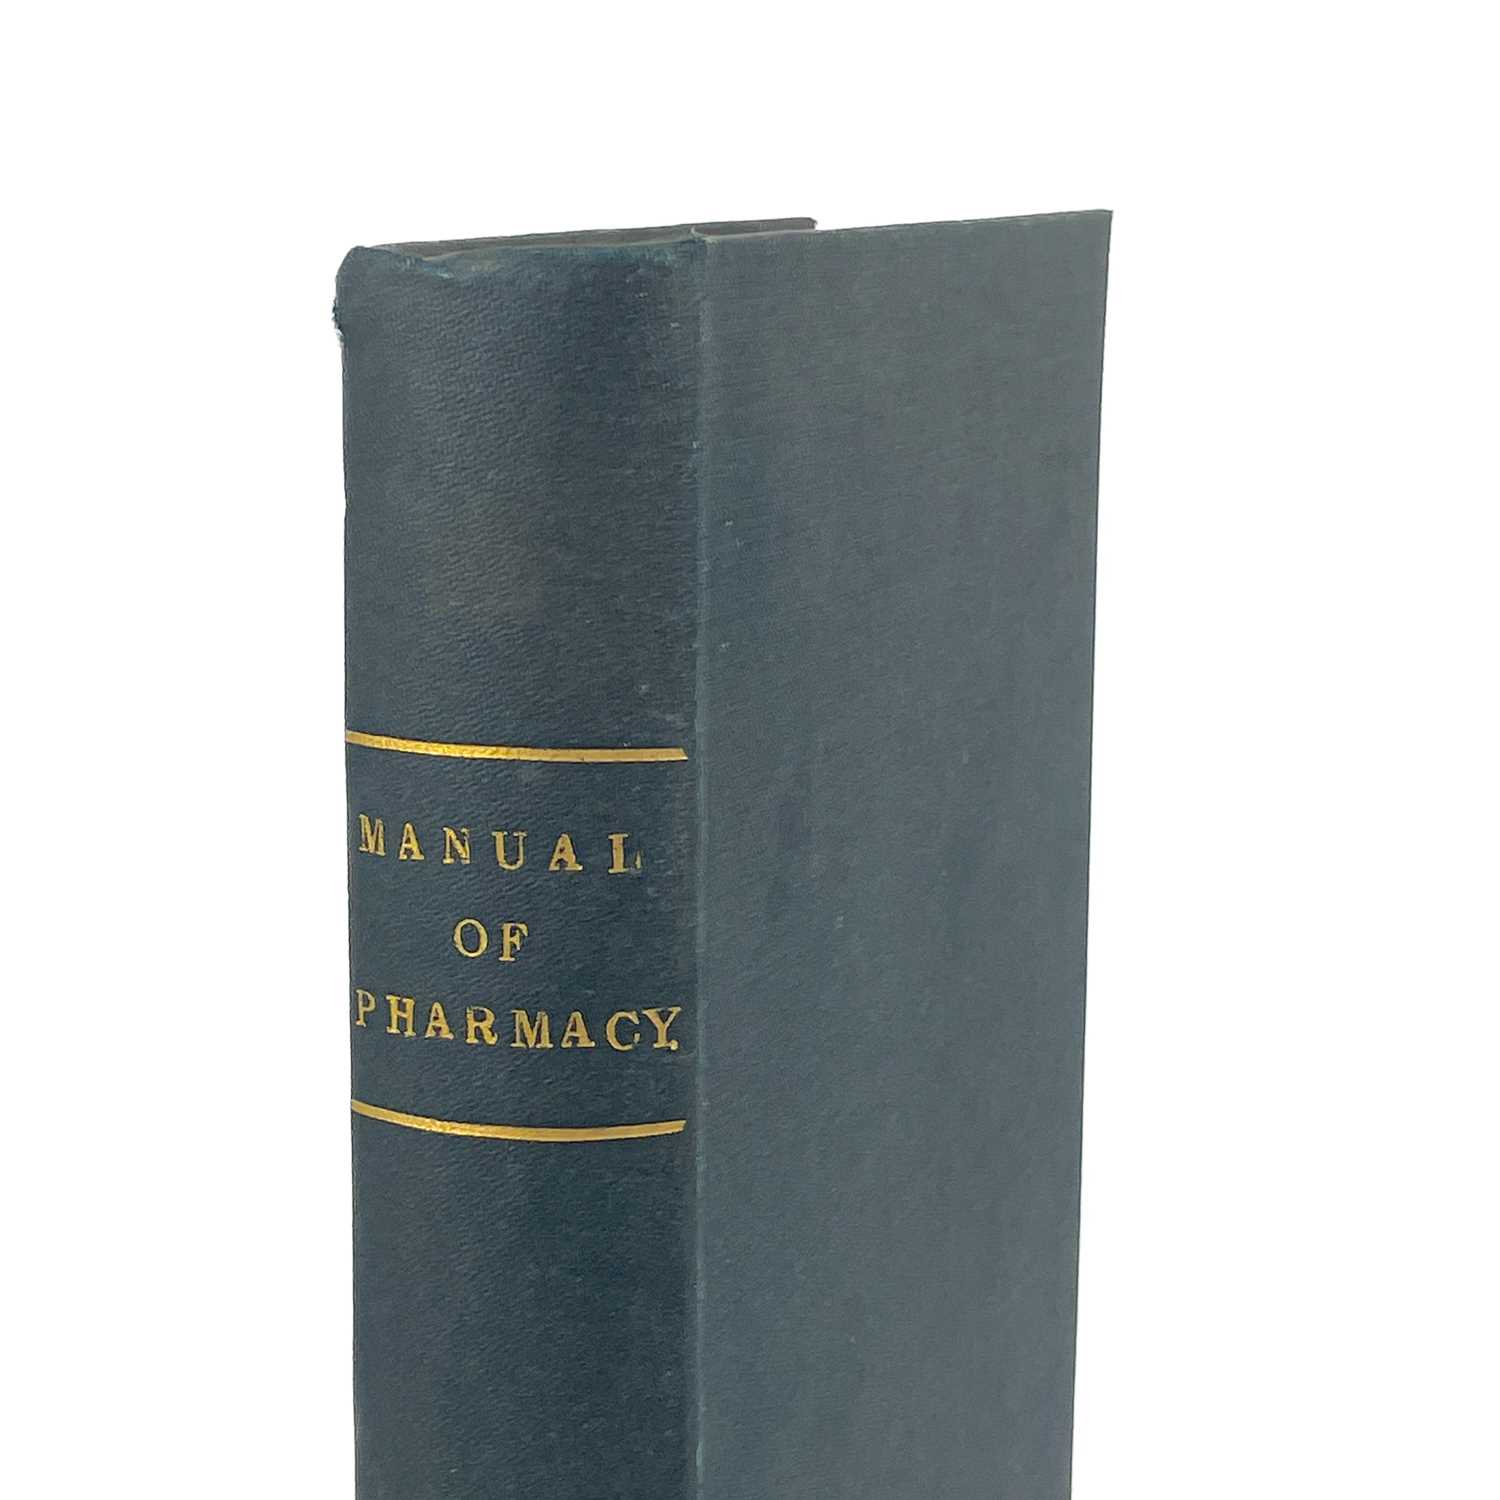 A MANUAL OF PHARMACY By William Thomas Brande (1829) - Image 2 of 10